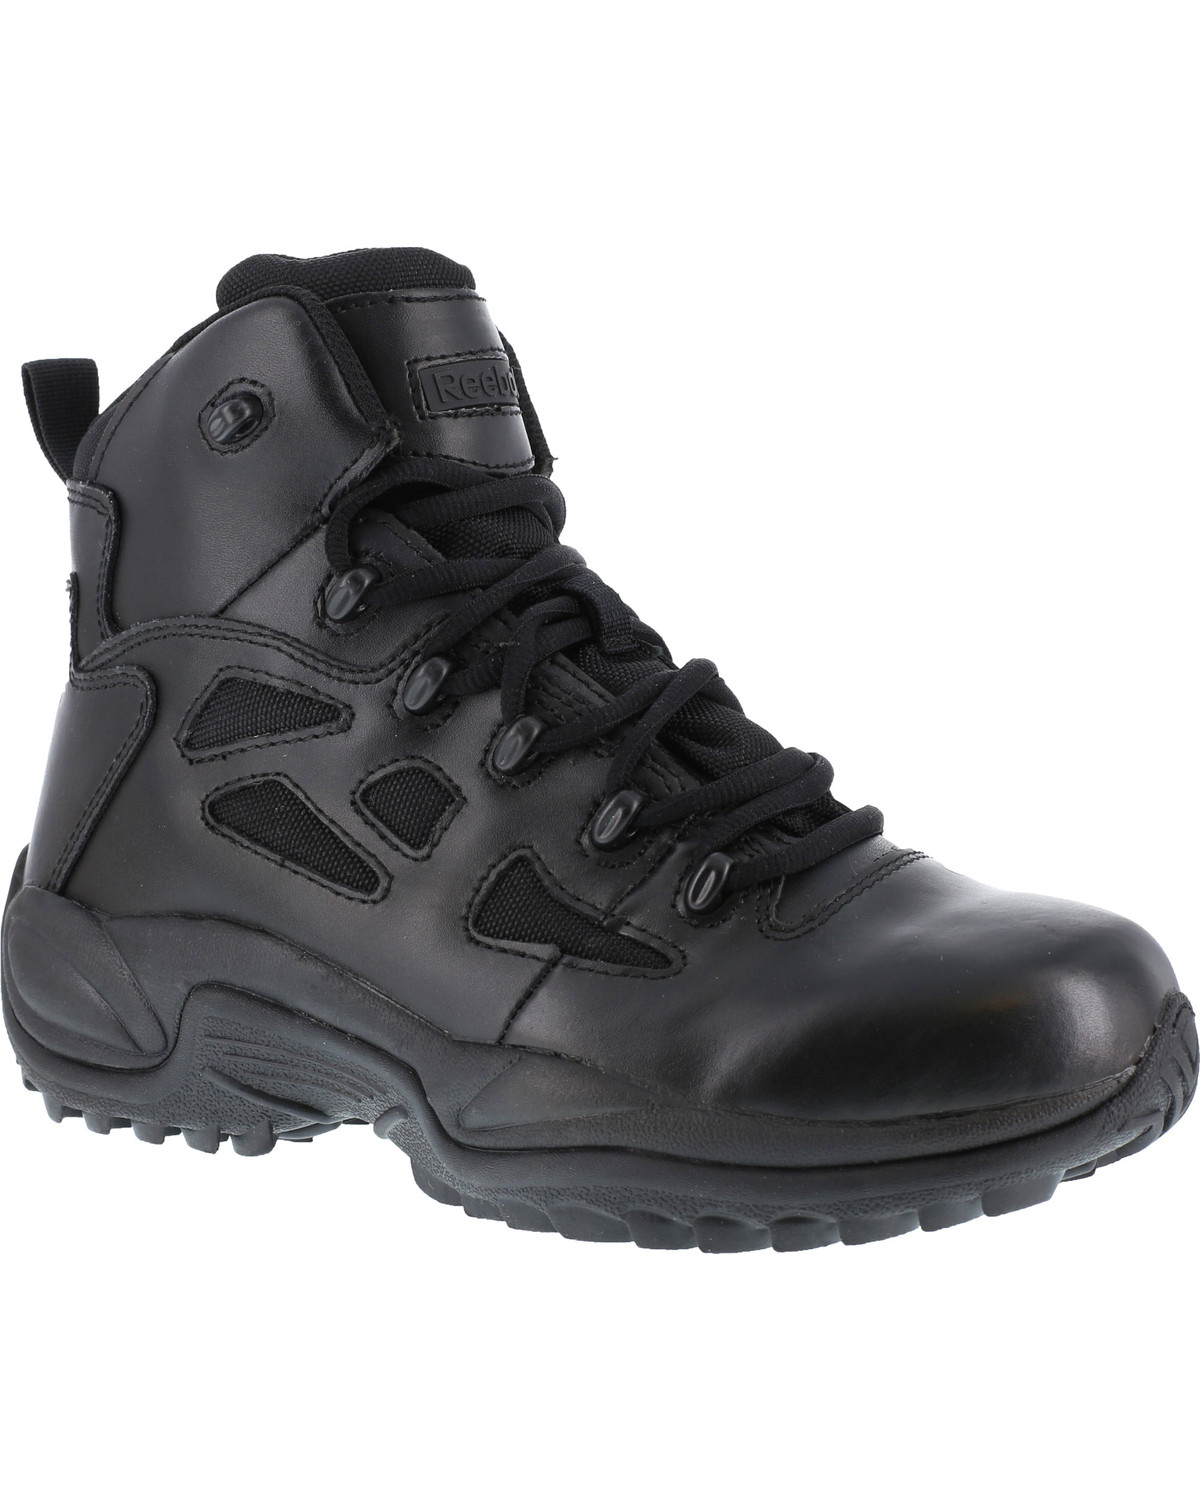 Reebok Men's Stealth 6" Lace-Up Work Boots - Soft Toe